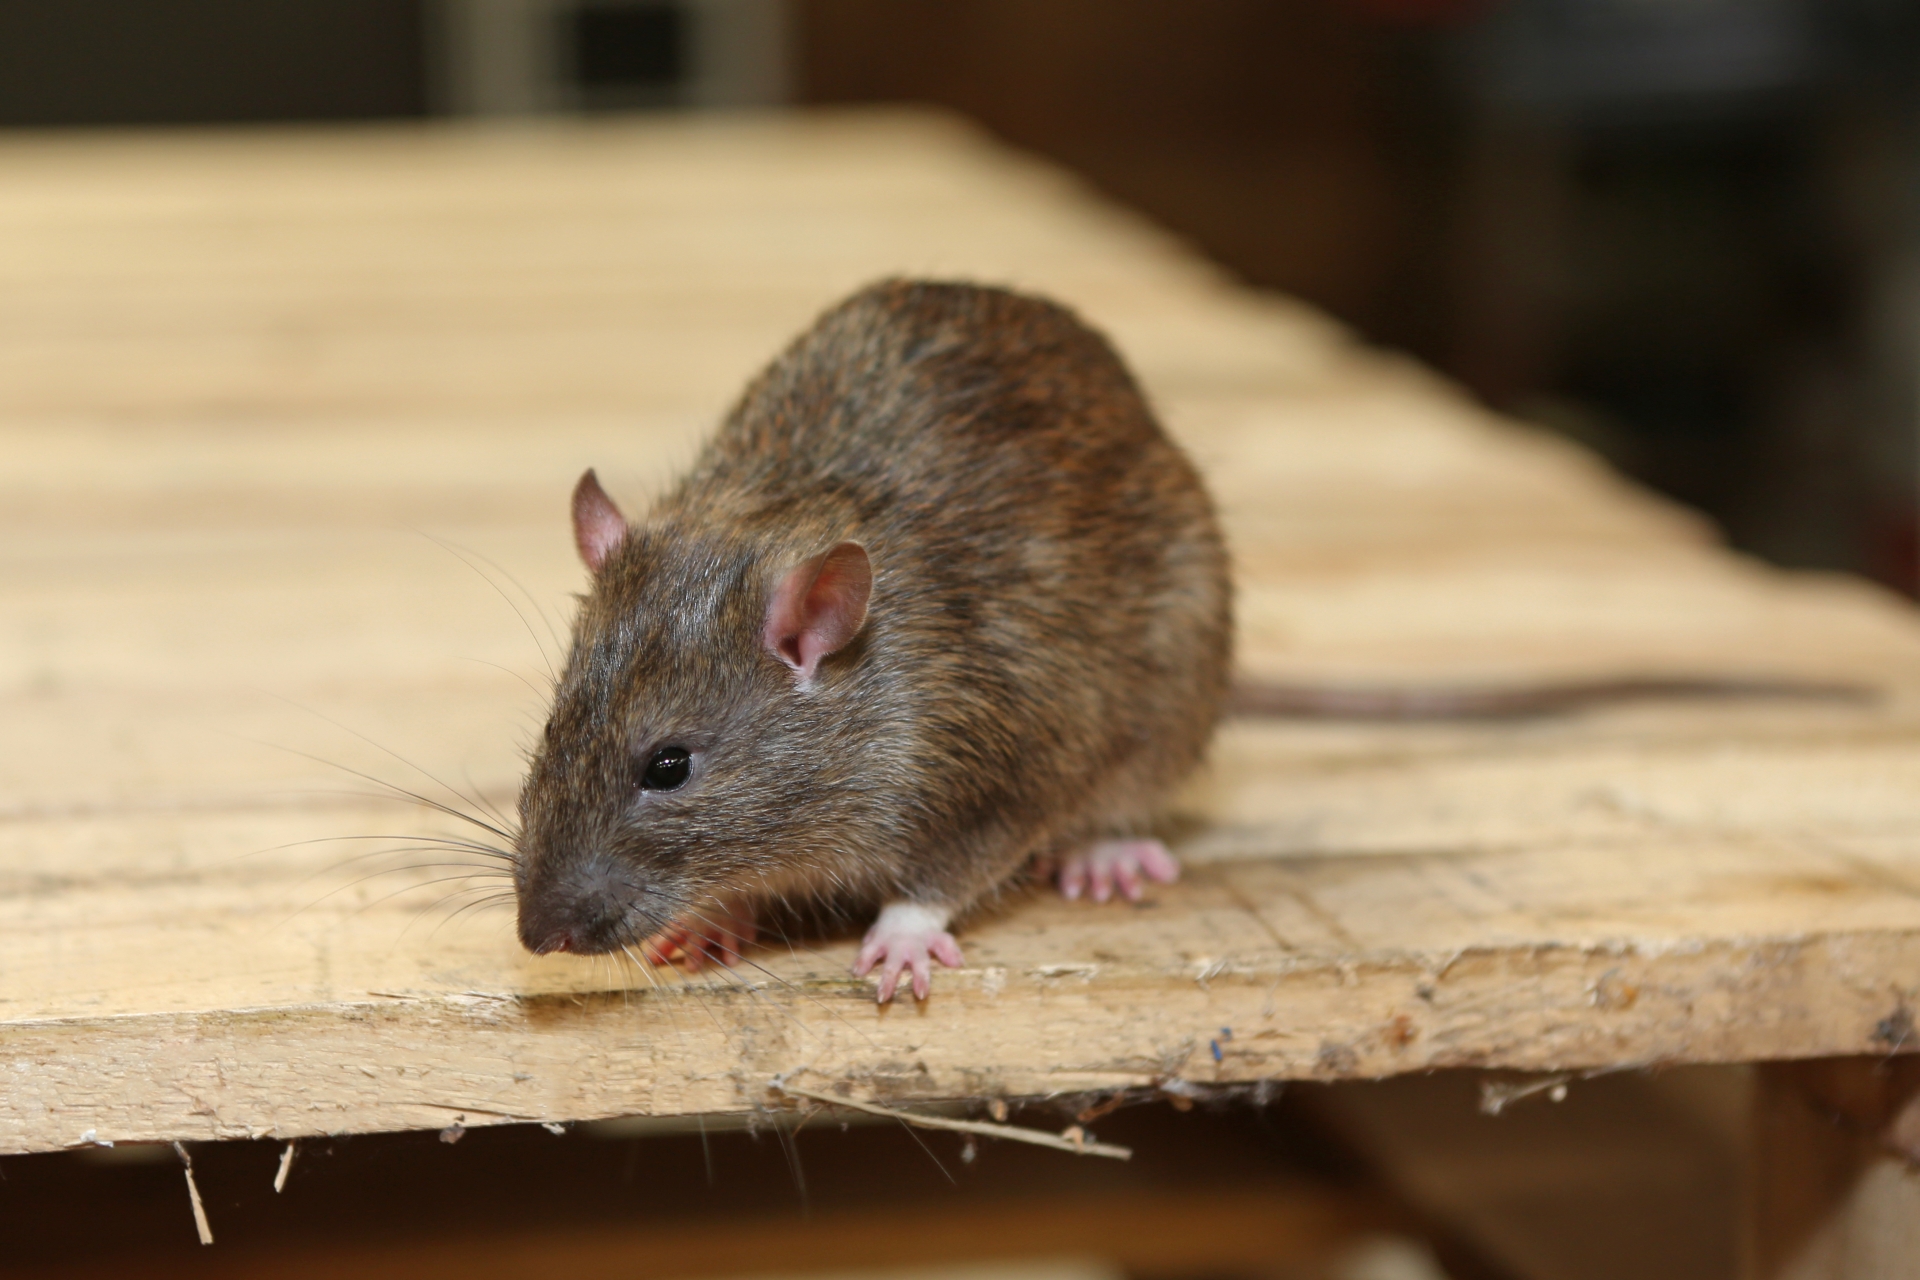 Rat Control, Pest Control in North Finchley, Woodside Park, N12. Call Now 020 8166 9746